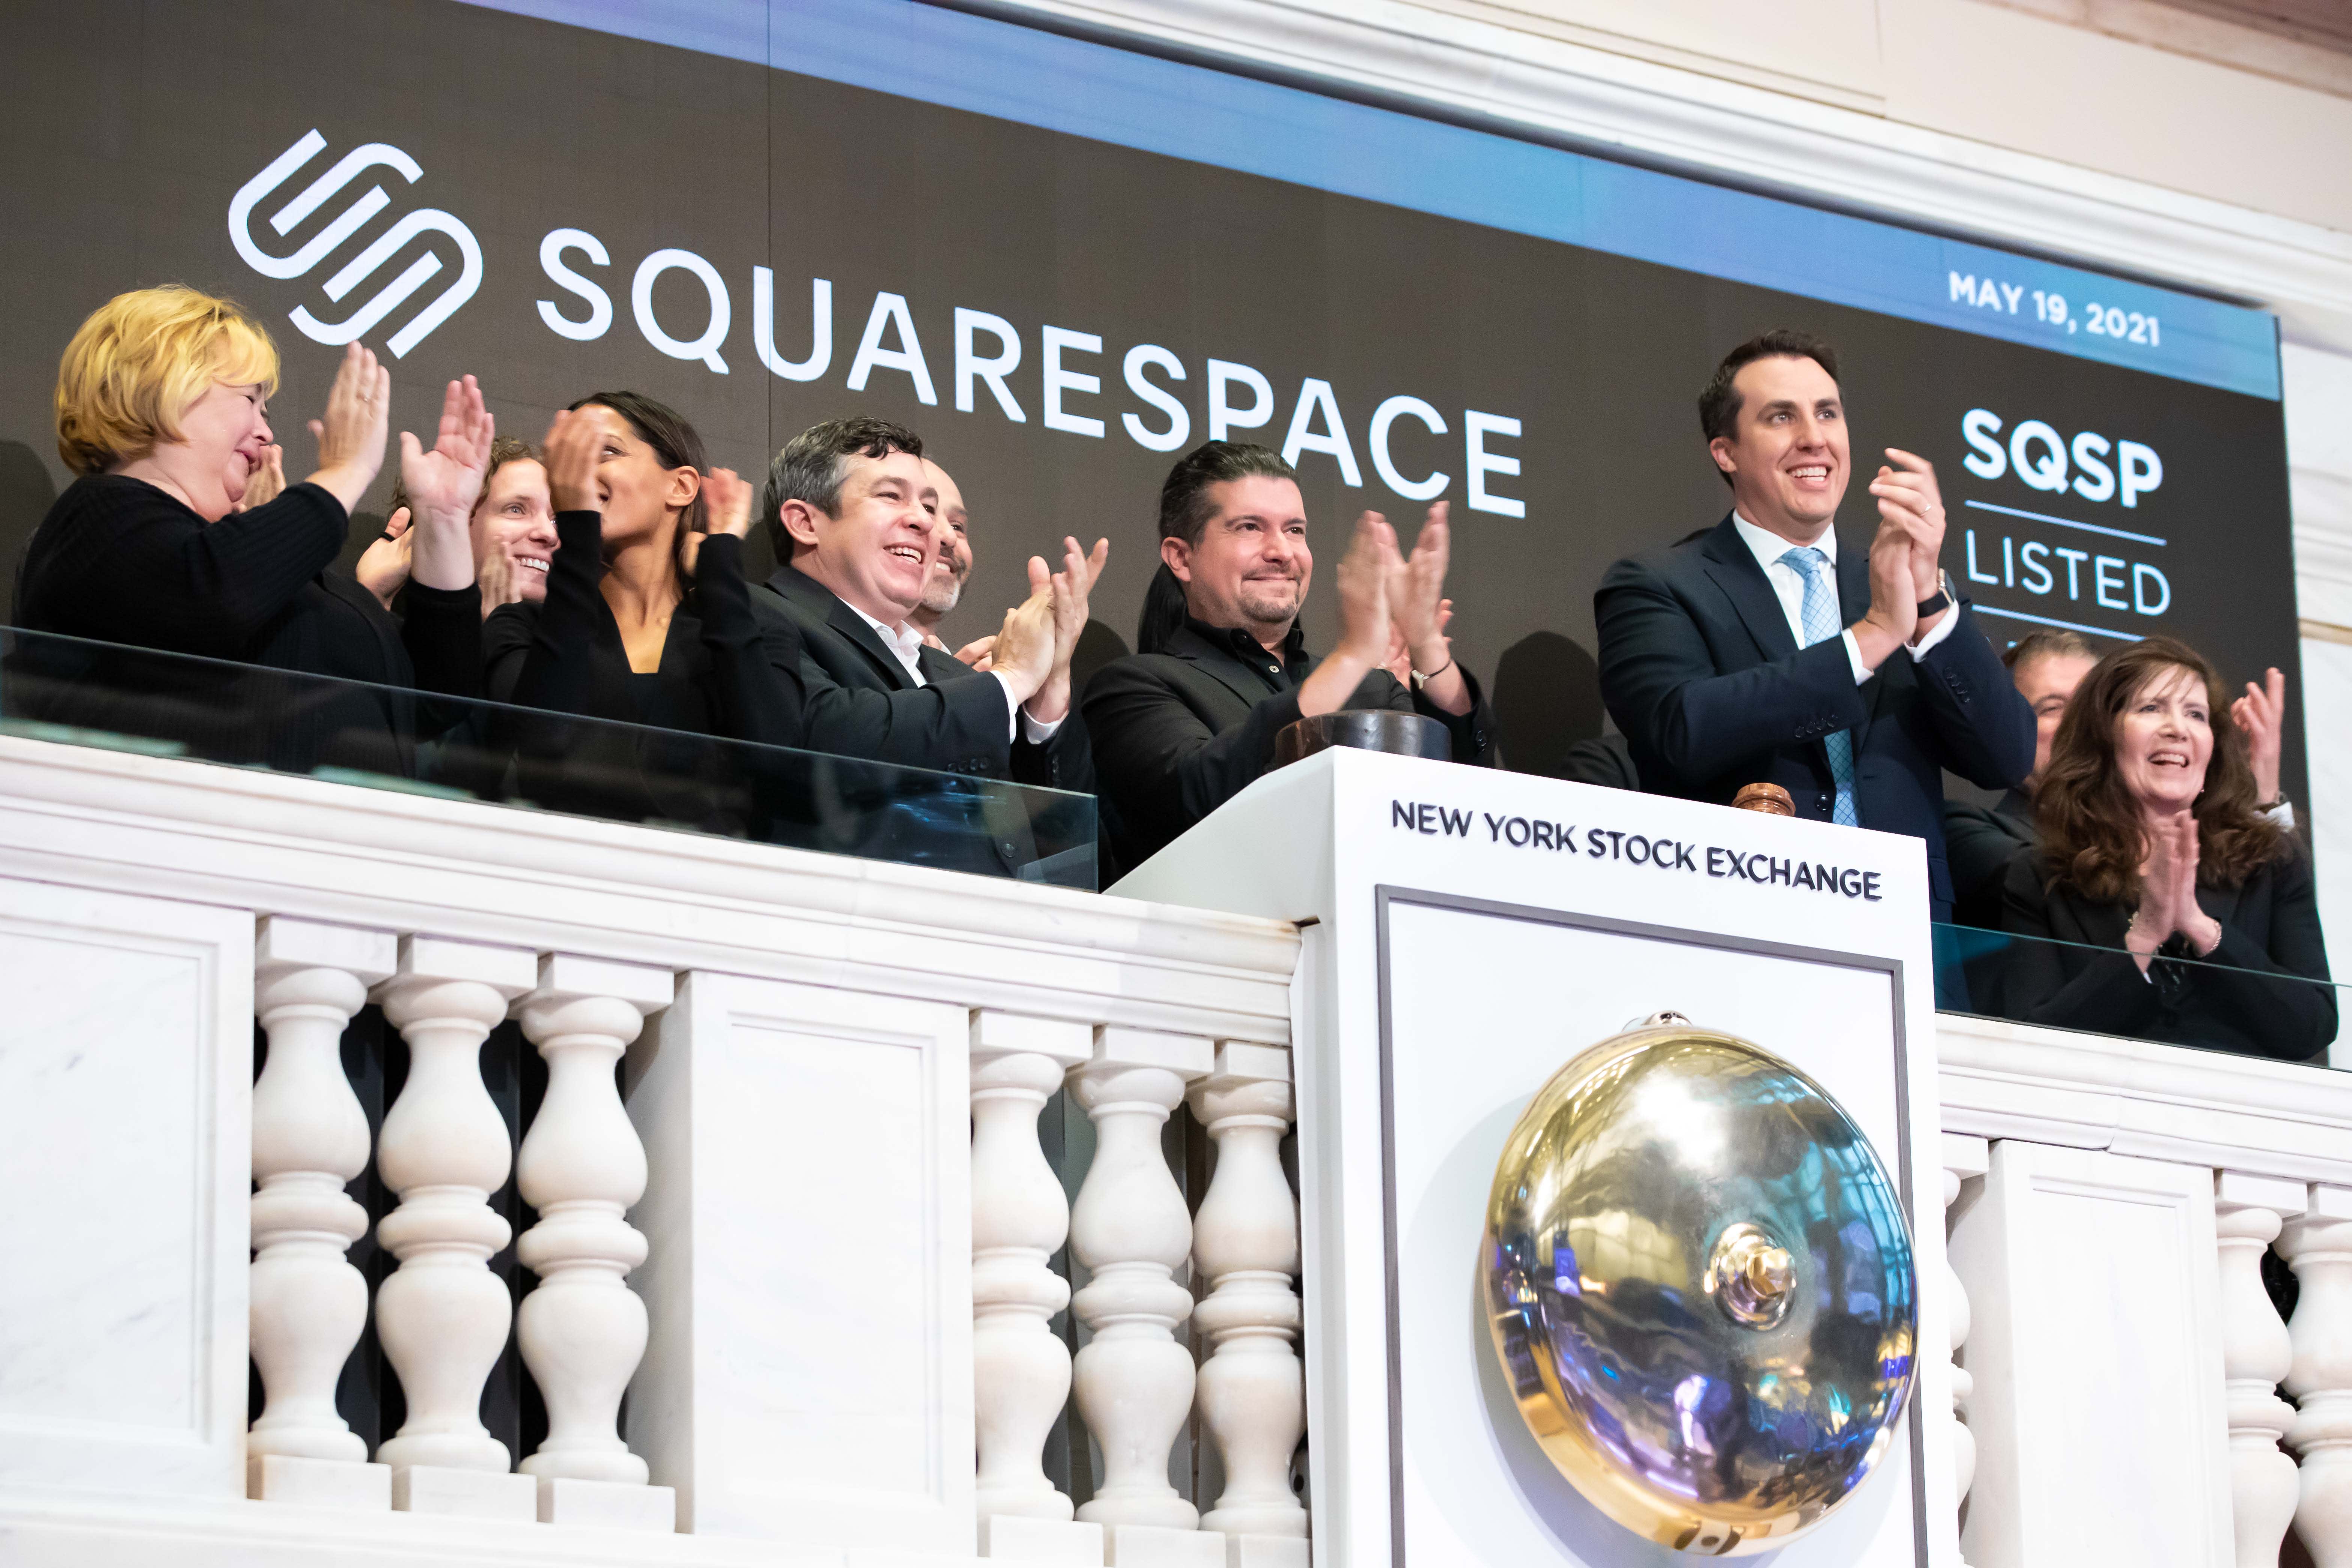 Squarespace CEO is worth $2.4 billion after web company he built in college debuts on NYSE